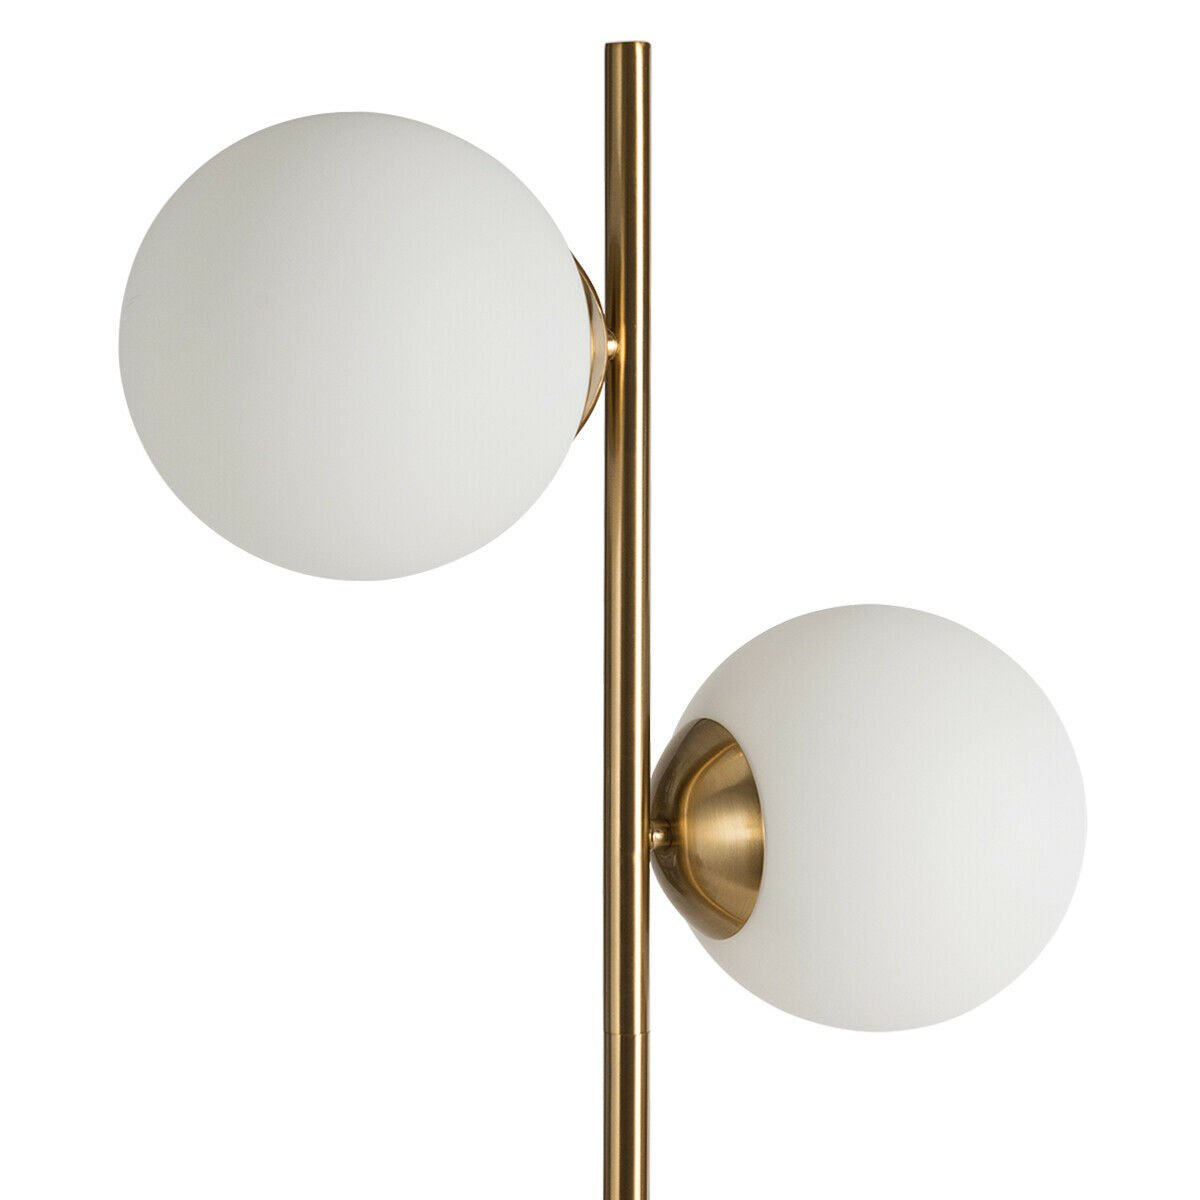 65 Inch LED Floor Lamp with 2 Light Bulbs and Foot Switch, Golden - Gallery Canada